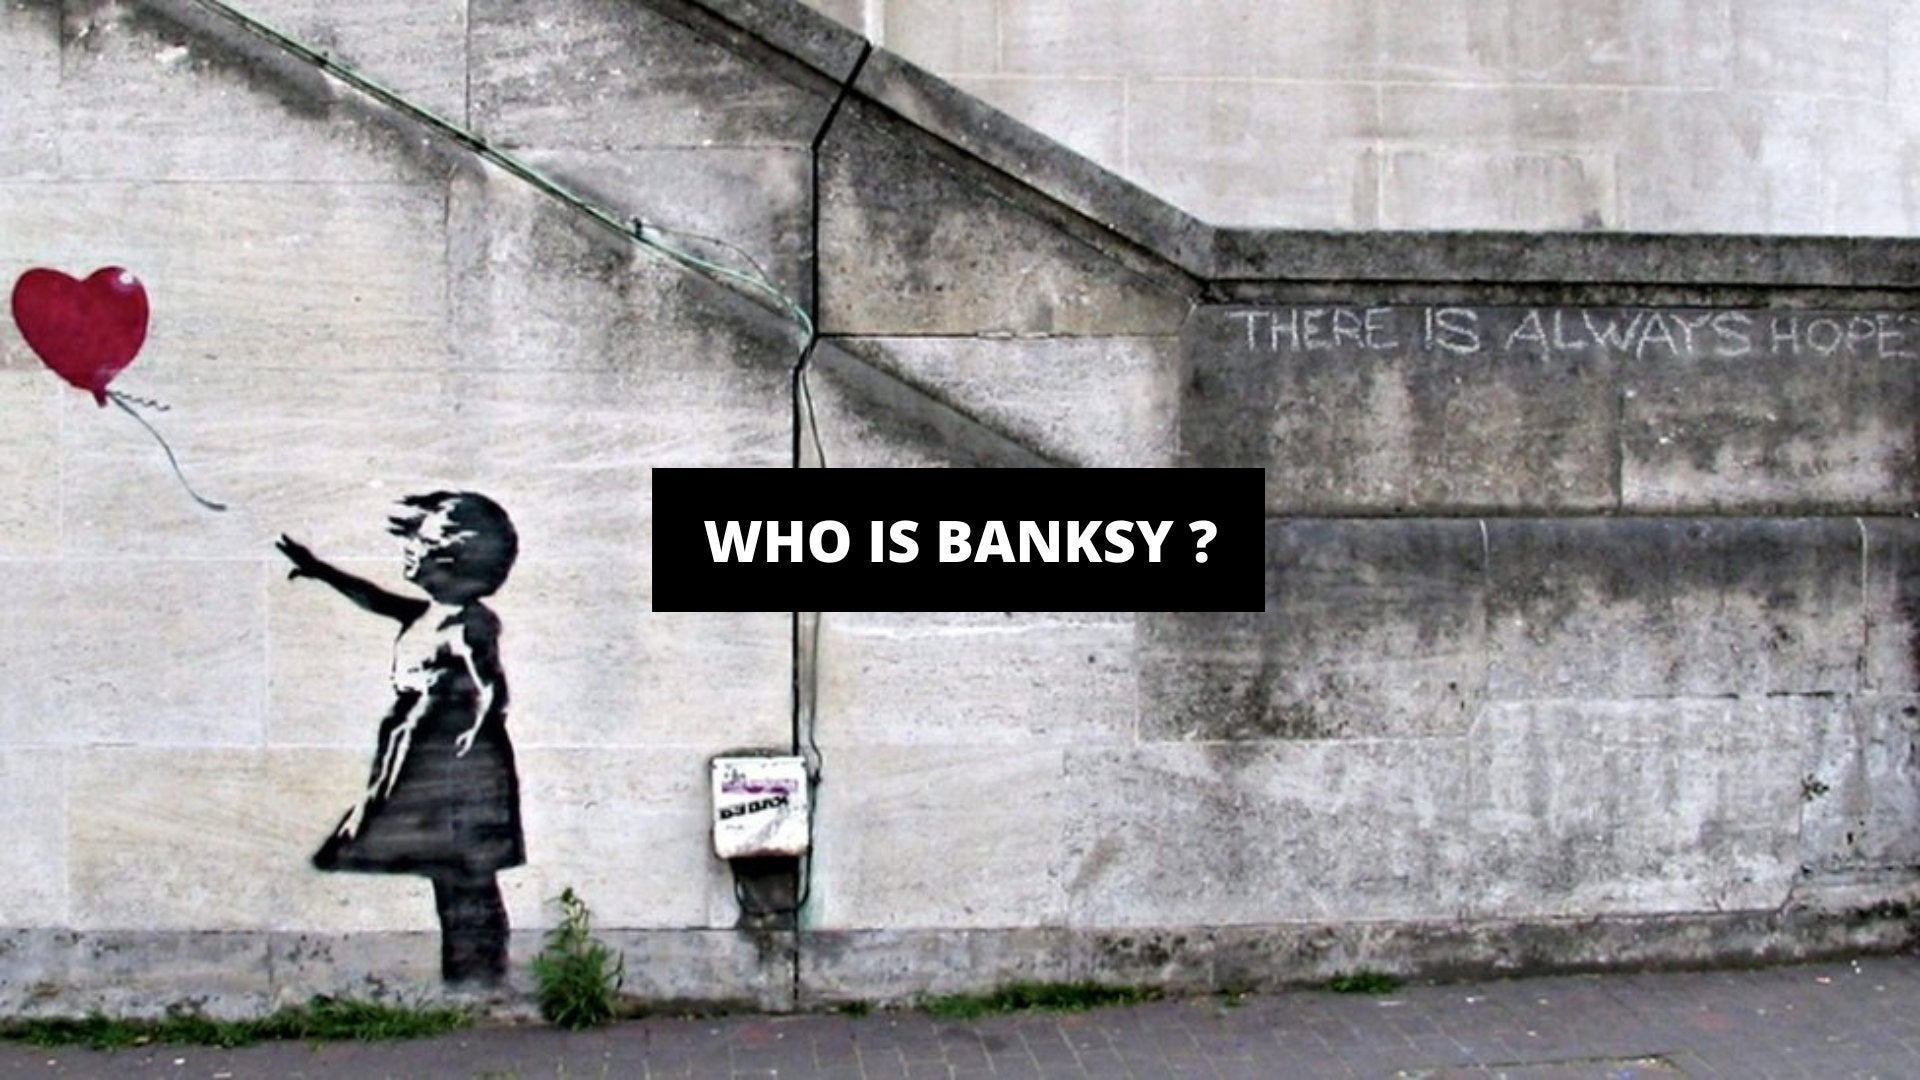 Who Is Banksy ? - The Trendy Art